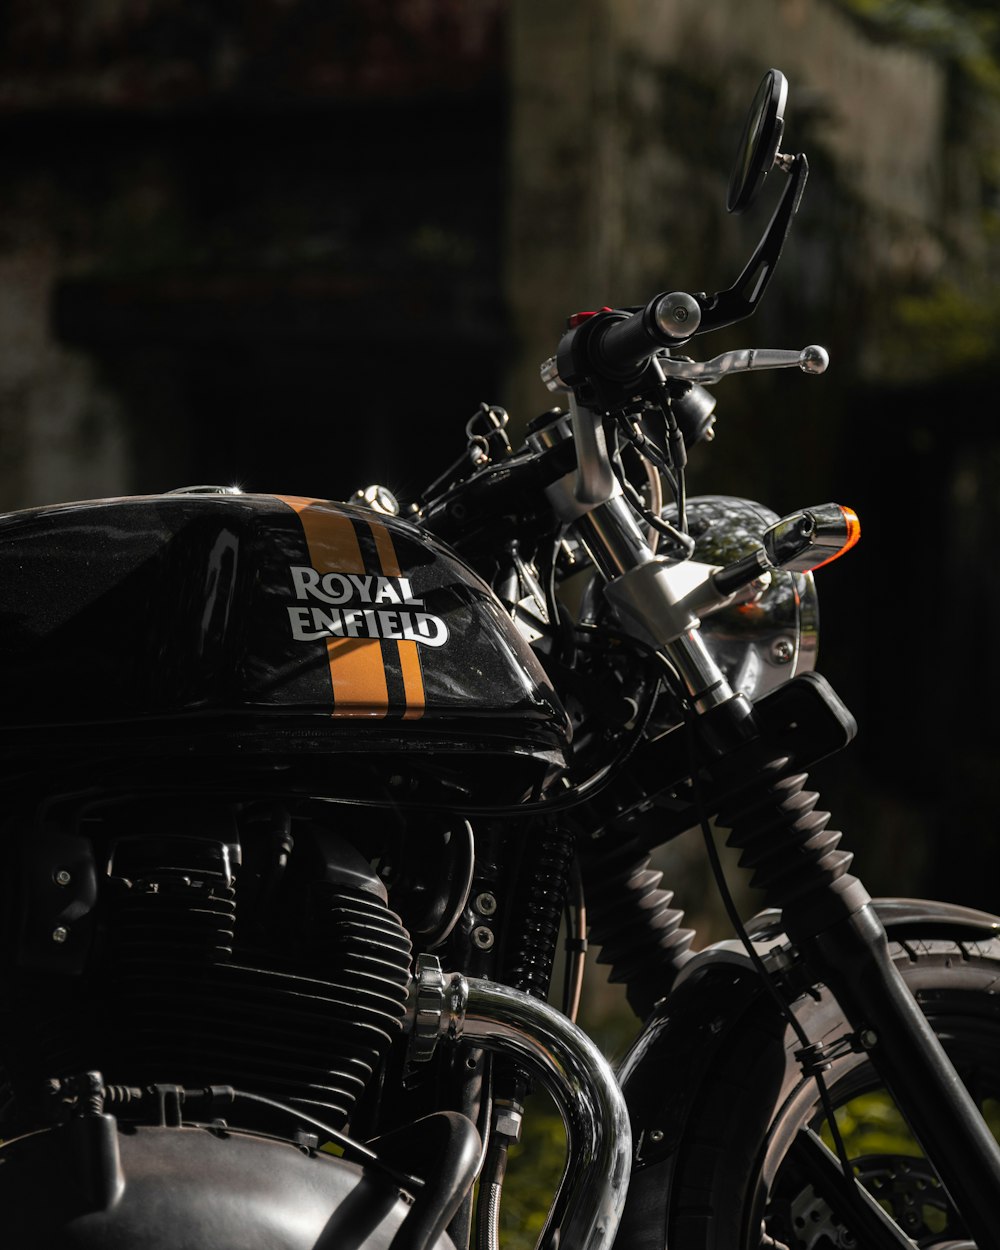 a royal enfield motorcycle parked in front of a building